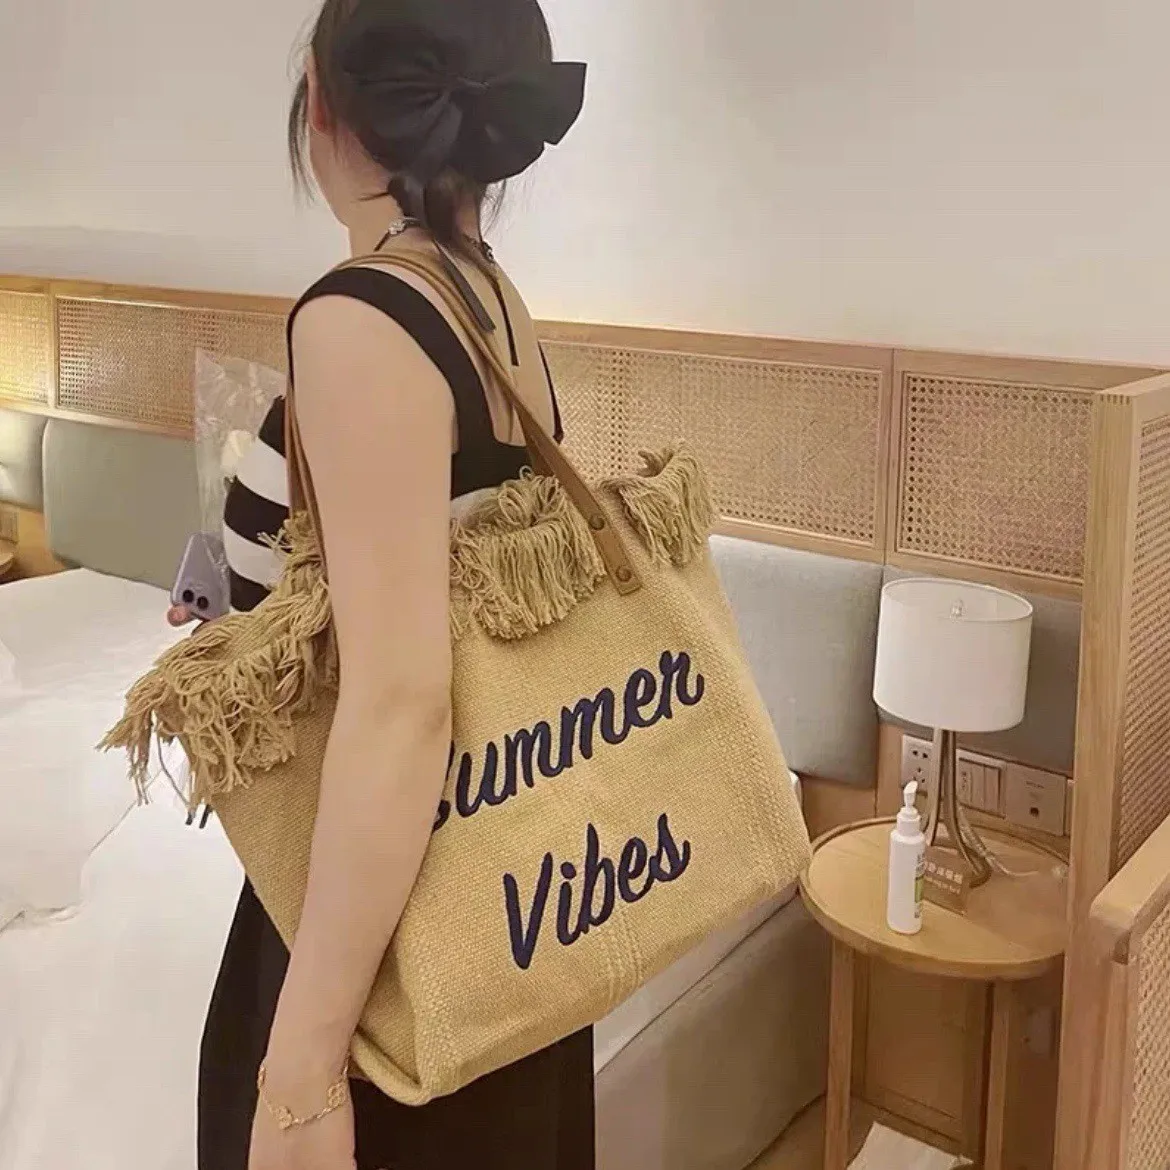 Double straps casual women's tote Bags customize logo Embroidered canvas woven beach Women Shoulder Bag